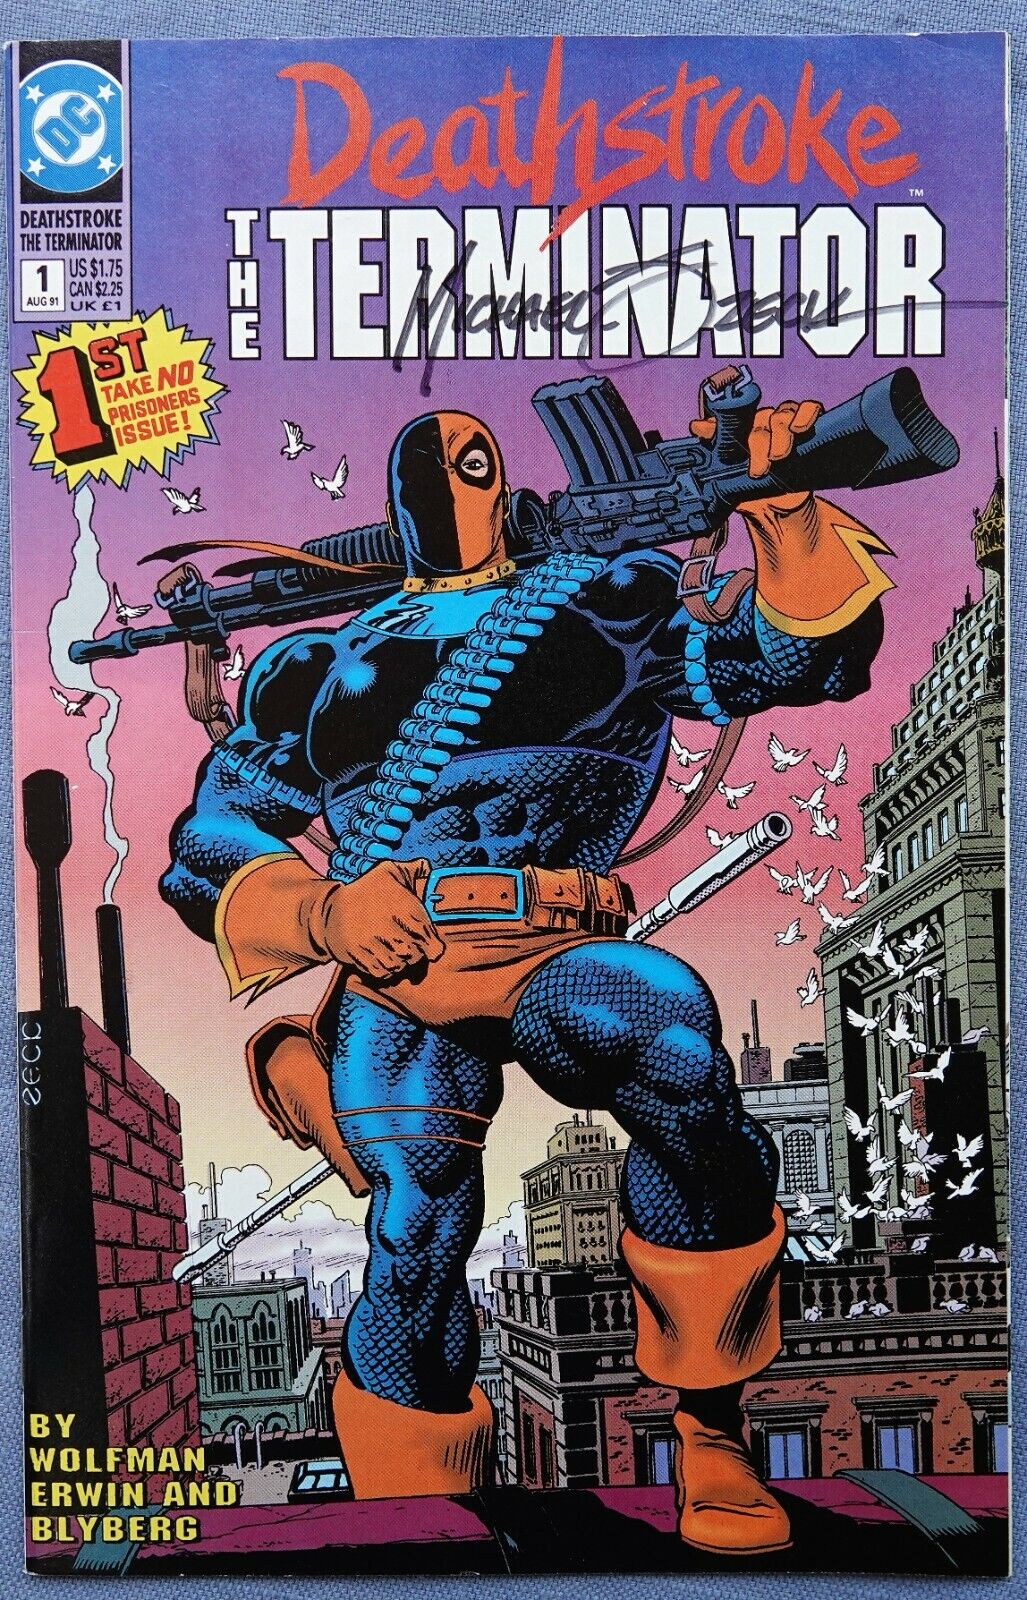 DEATHSTROKE THE TERMINATOR 1,AUG 1991 BY WOLFMAN ERWIN & BLYBERG SIGNED OZECK